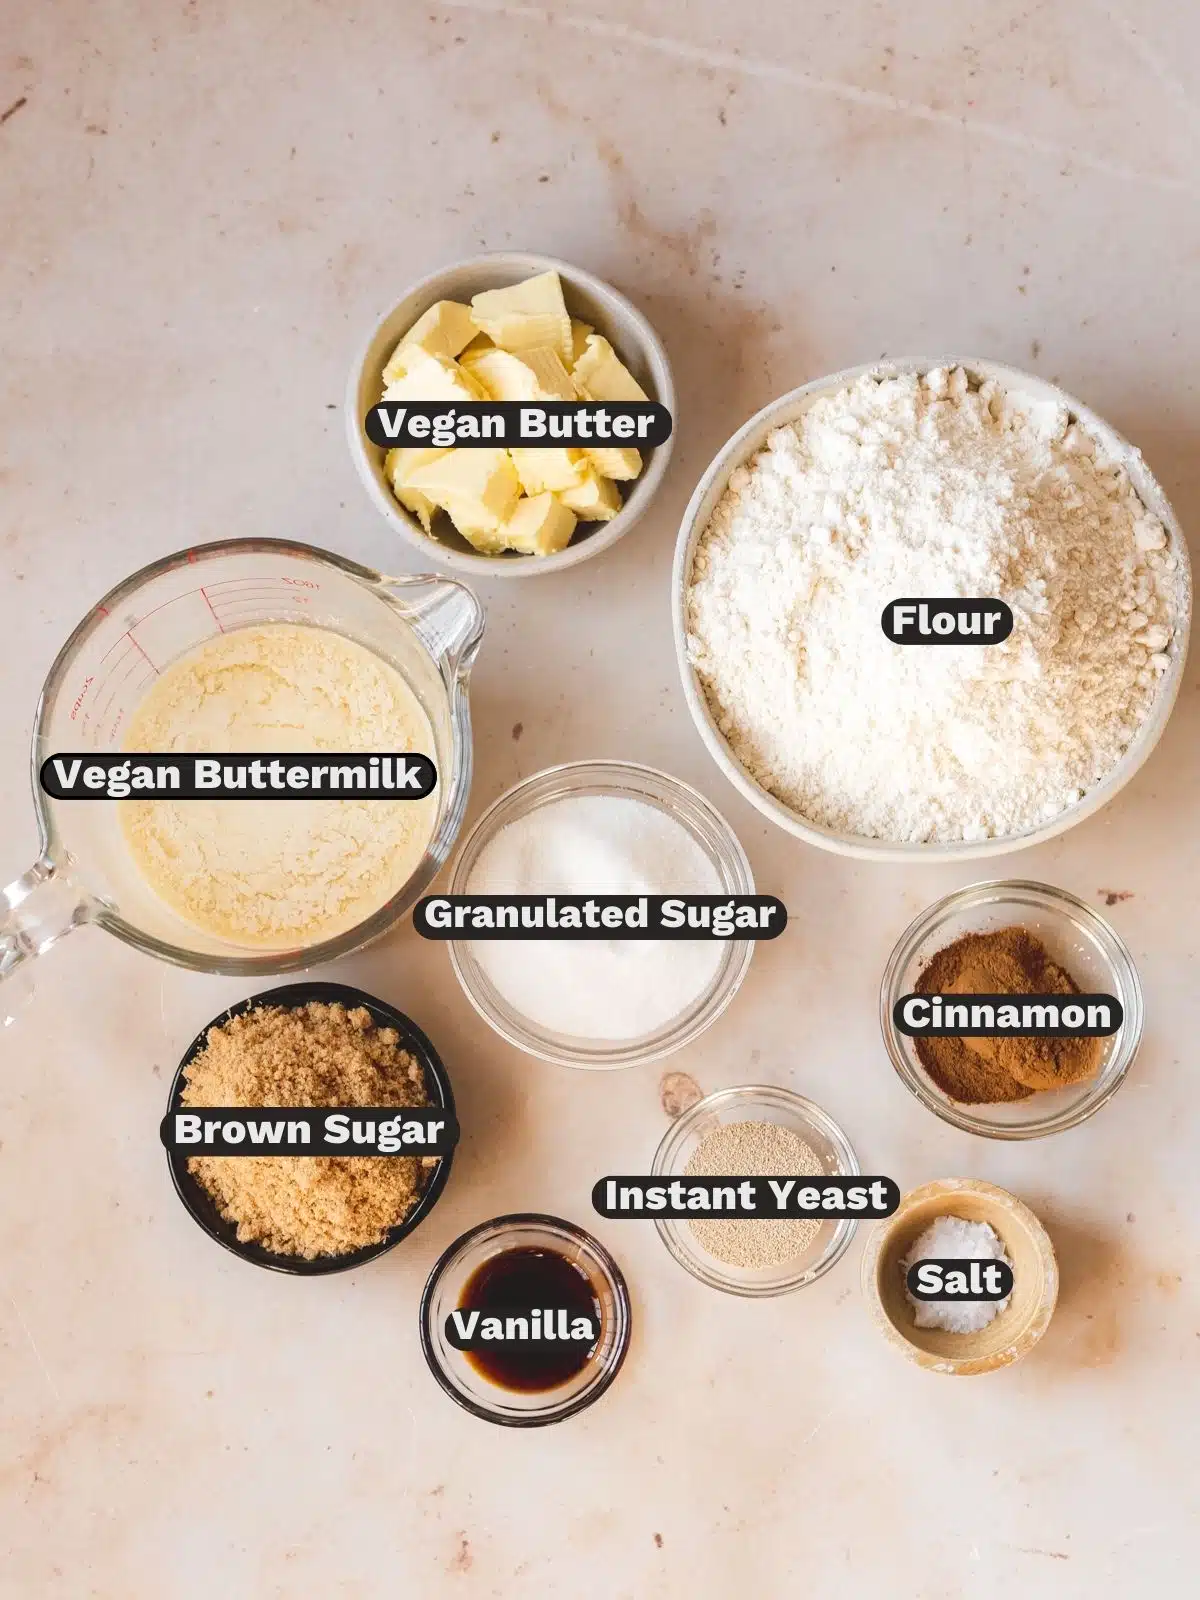 Ingredients needed to make vegan cinnamon buns measured out into bowls on a white table with text overlay.